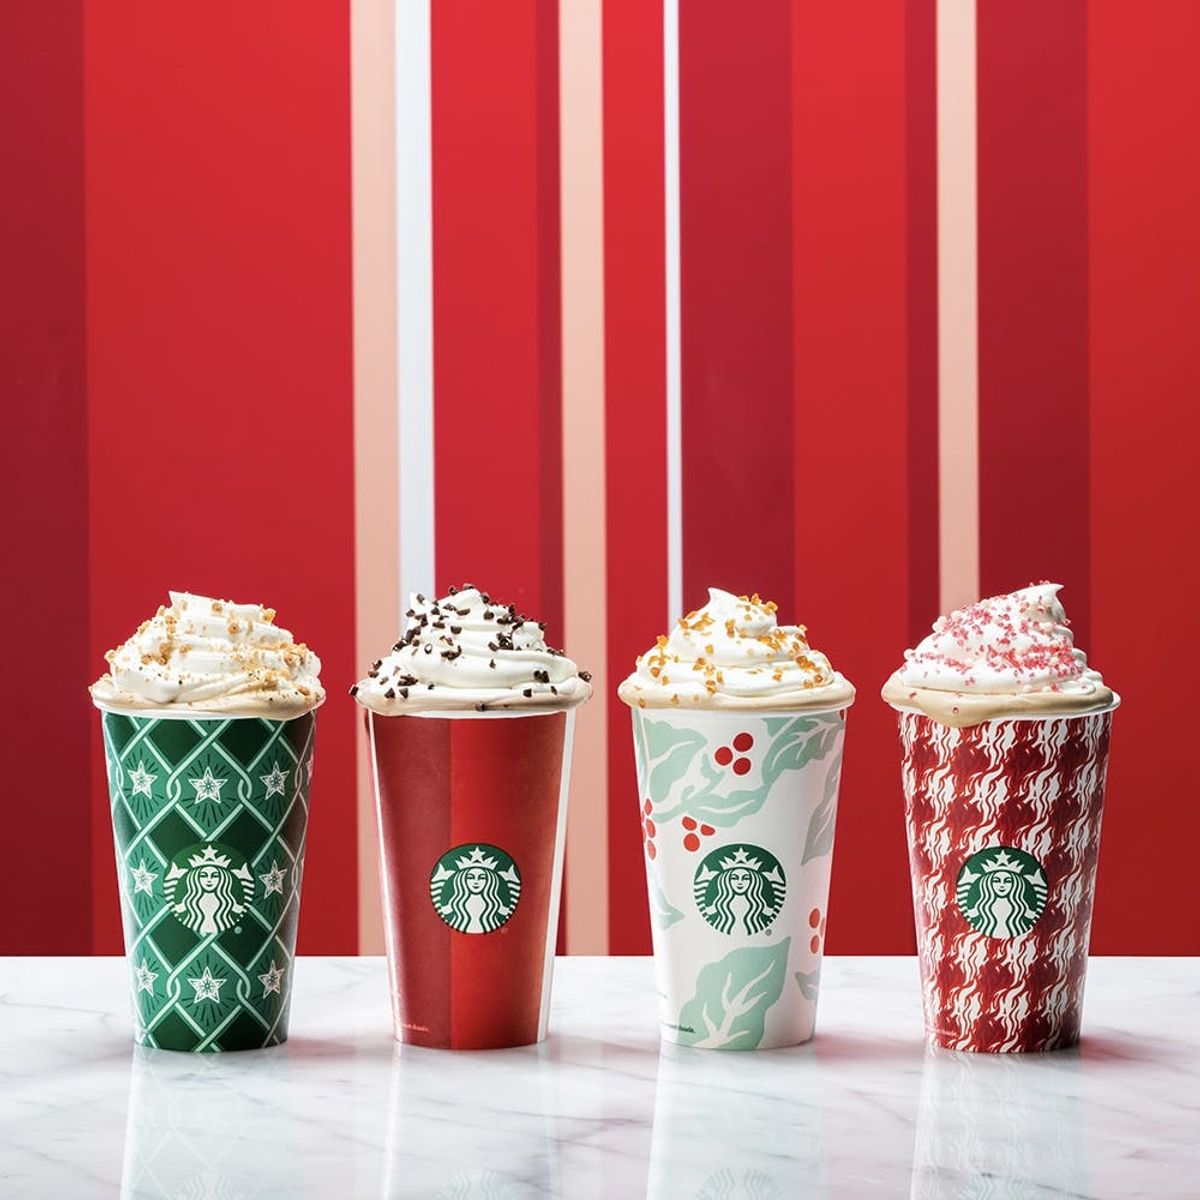 Starbucks Just Revealed Its 2018 Holiday Drinks and We Want Them All